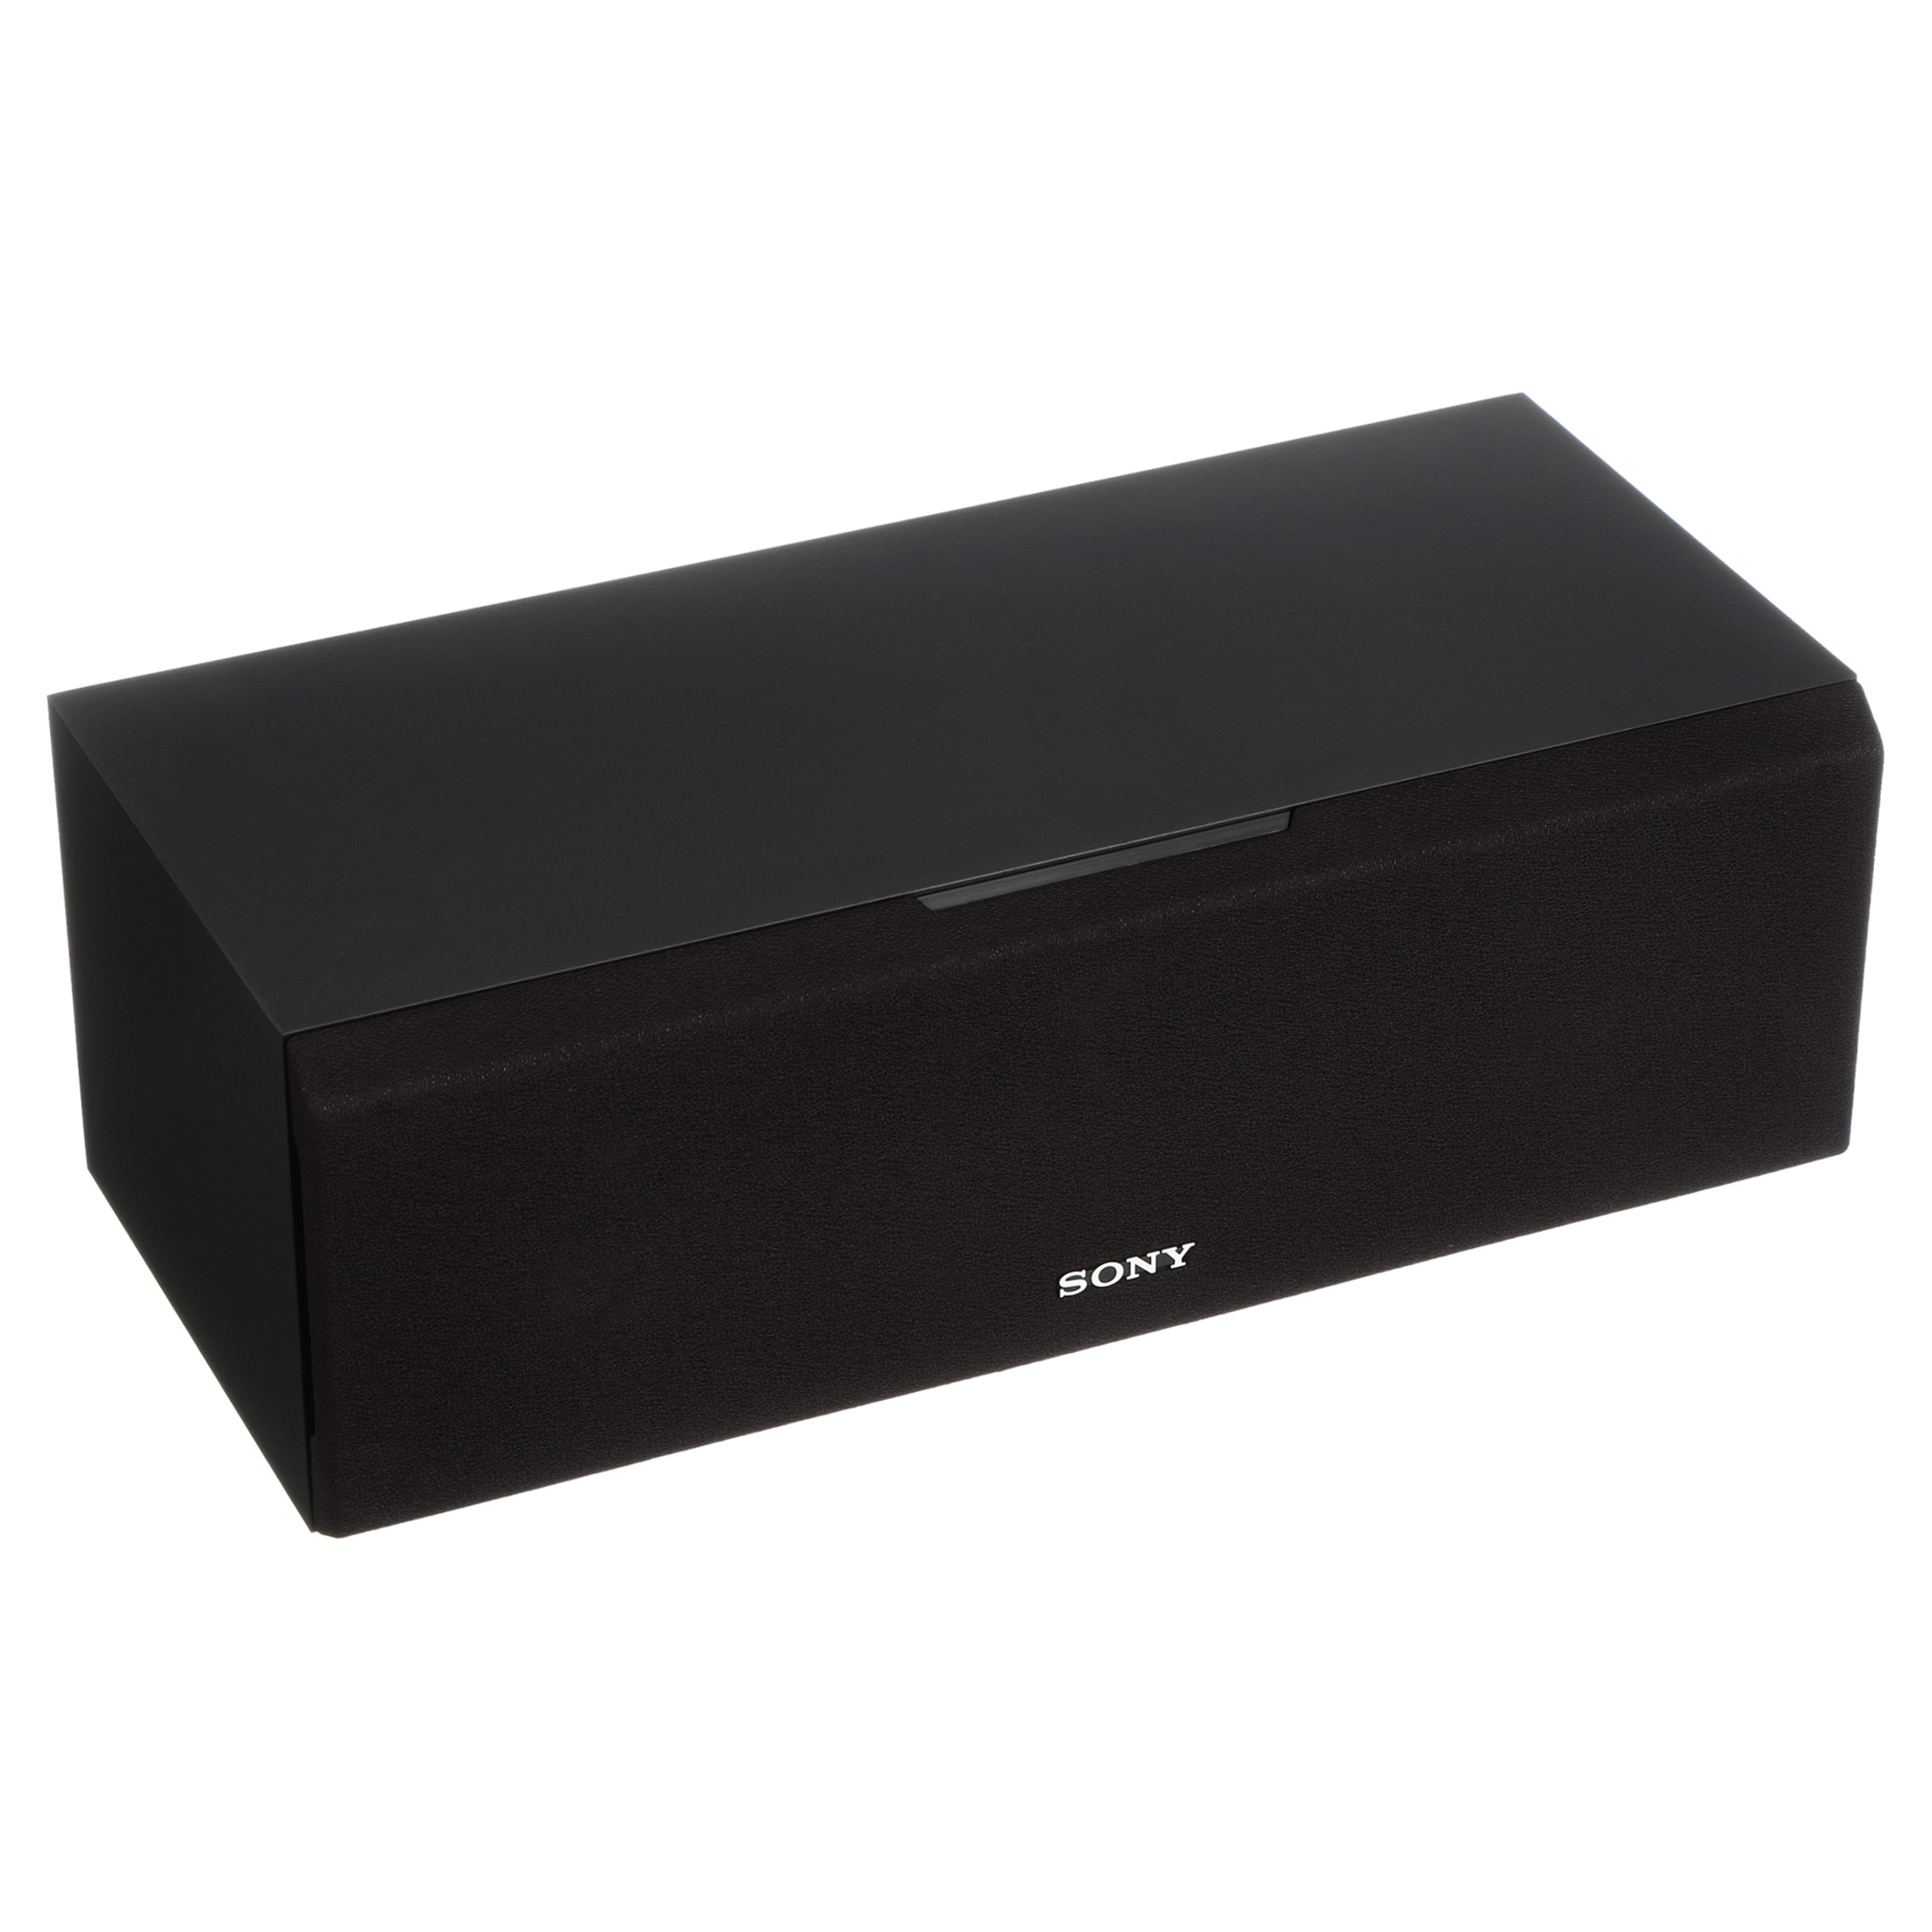 Sony SSCS8 2-Way 3-Driver Center Channel Speaker - Black - image 4 of 5